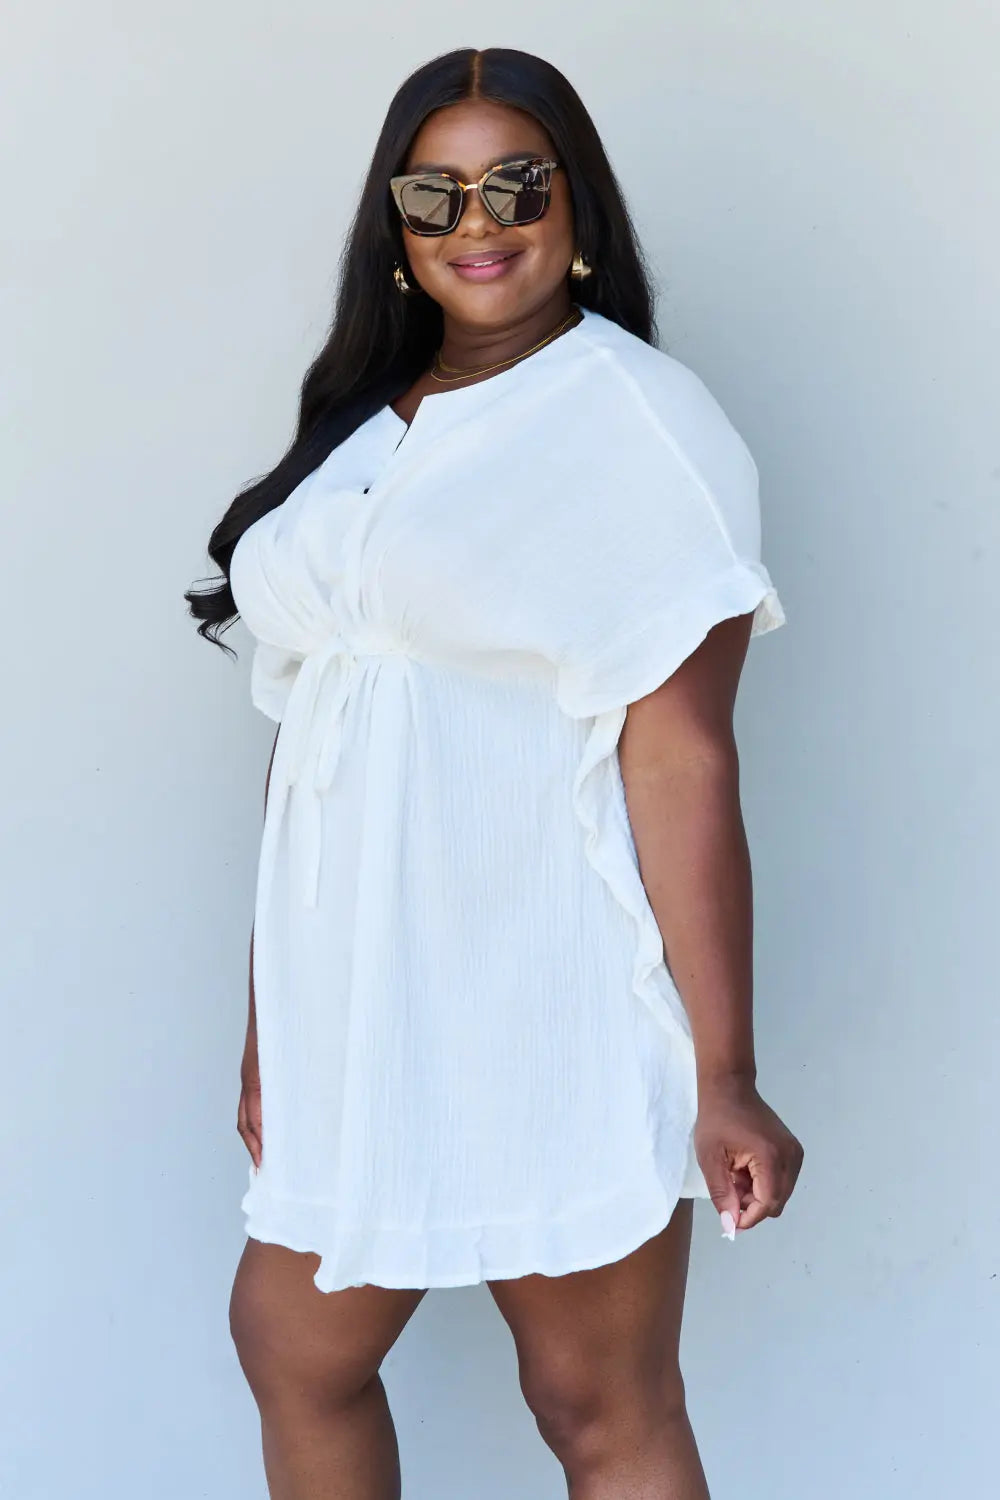 Ninexis Out Of Time Full Size Ruffle Hem Dress with Drawstring Waistband in White - Hot Trends